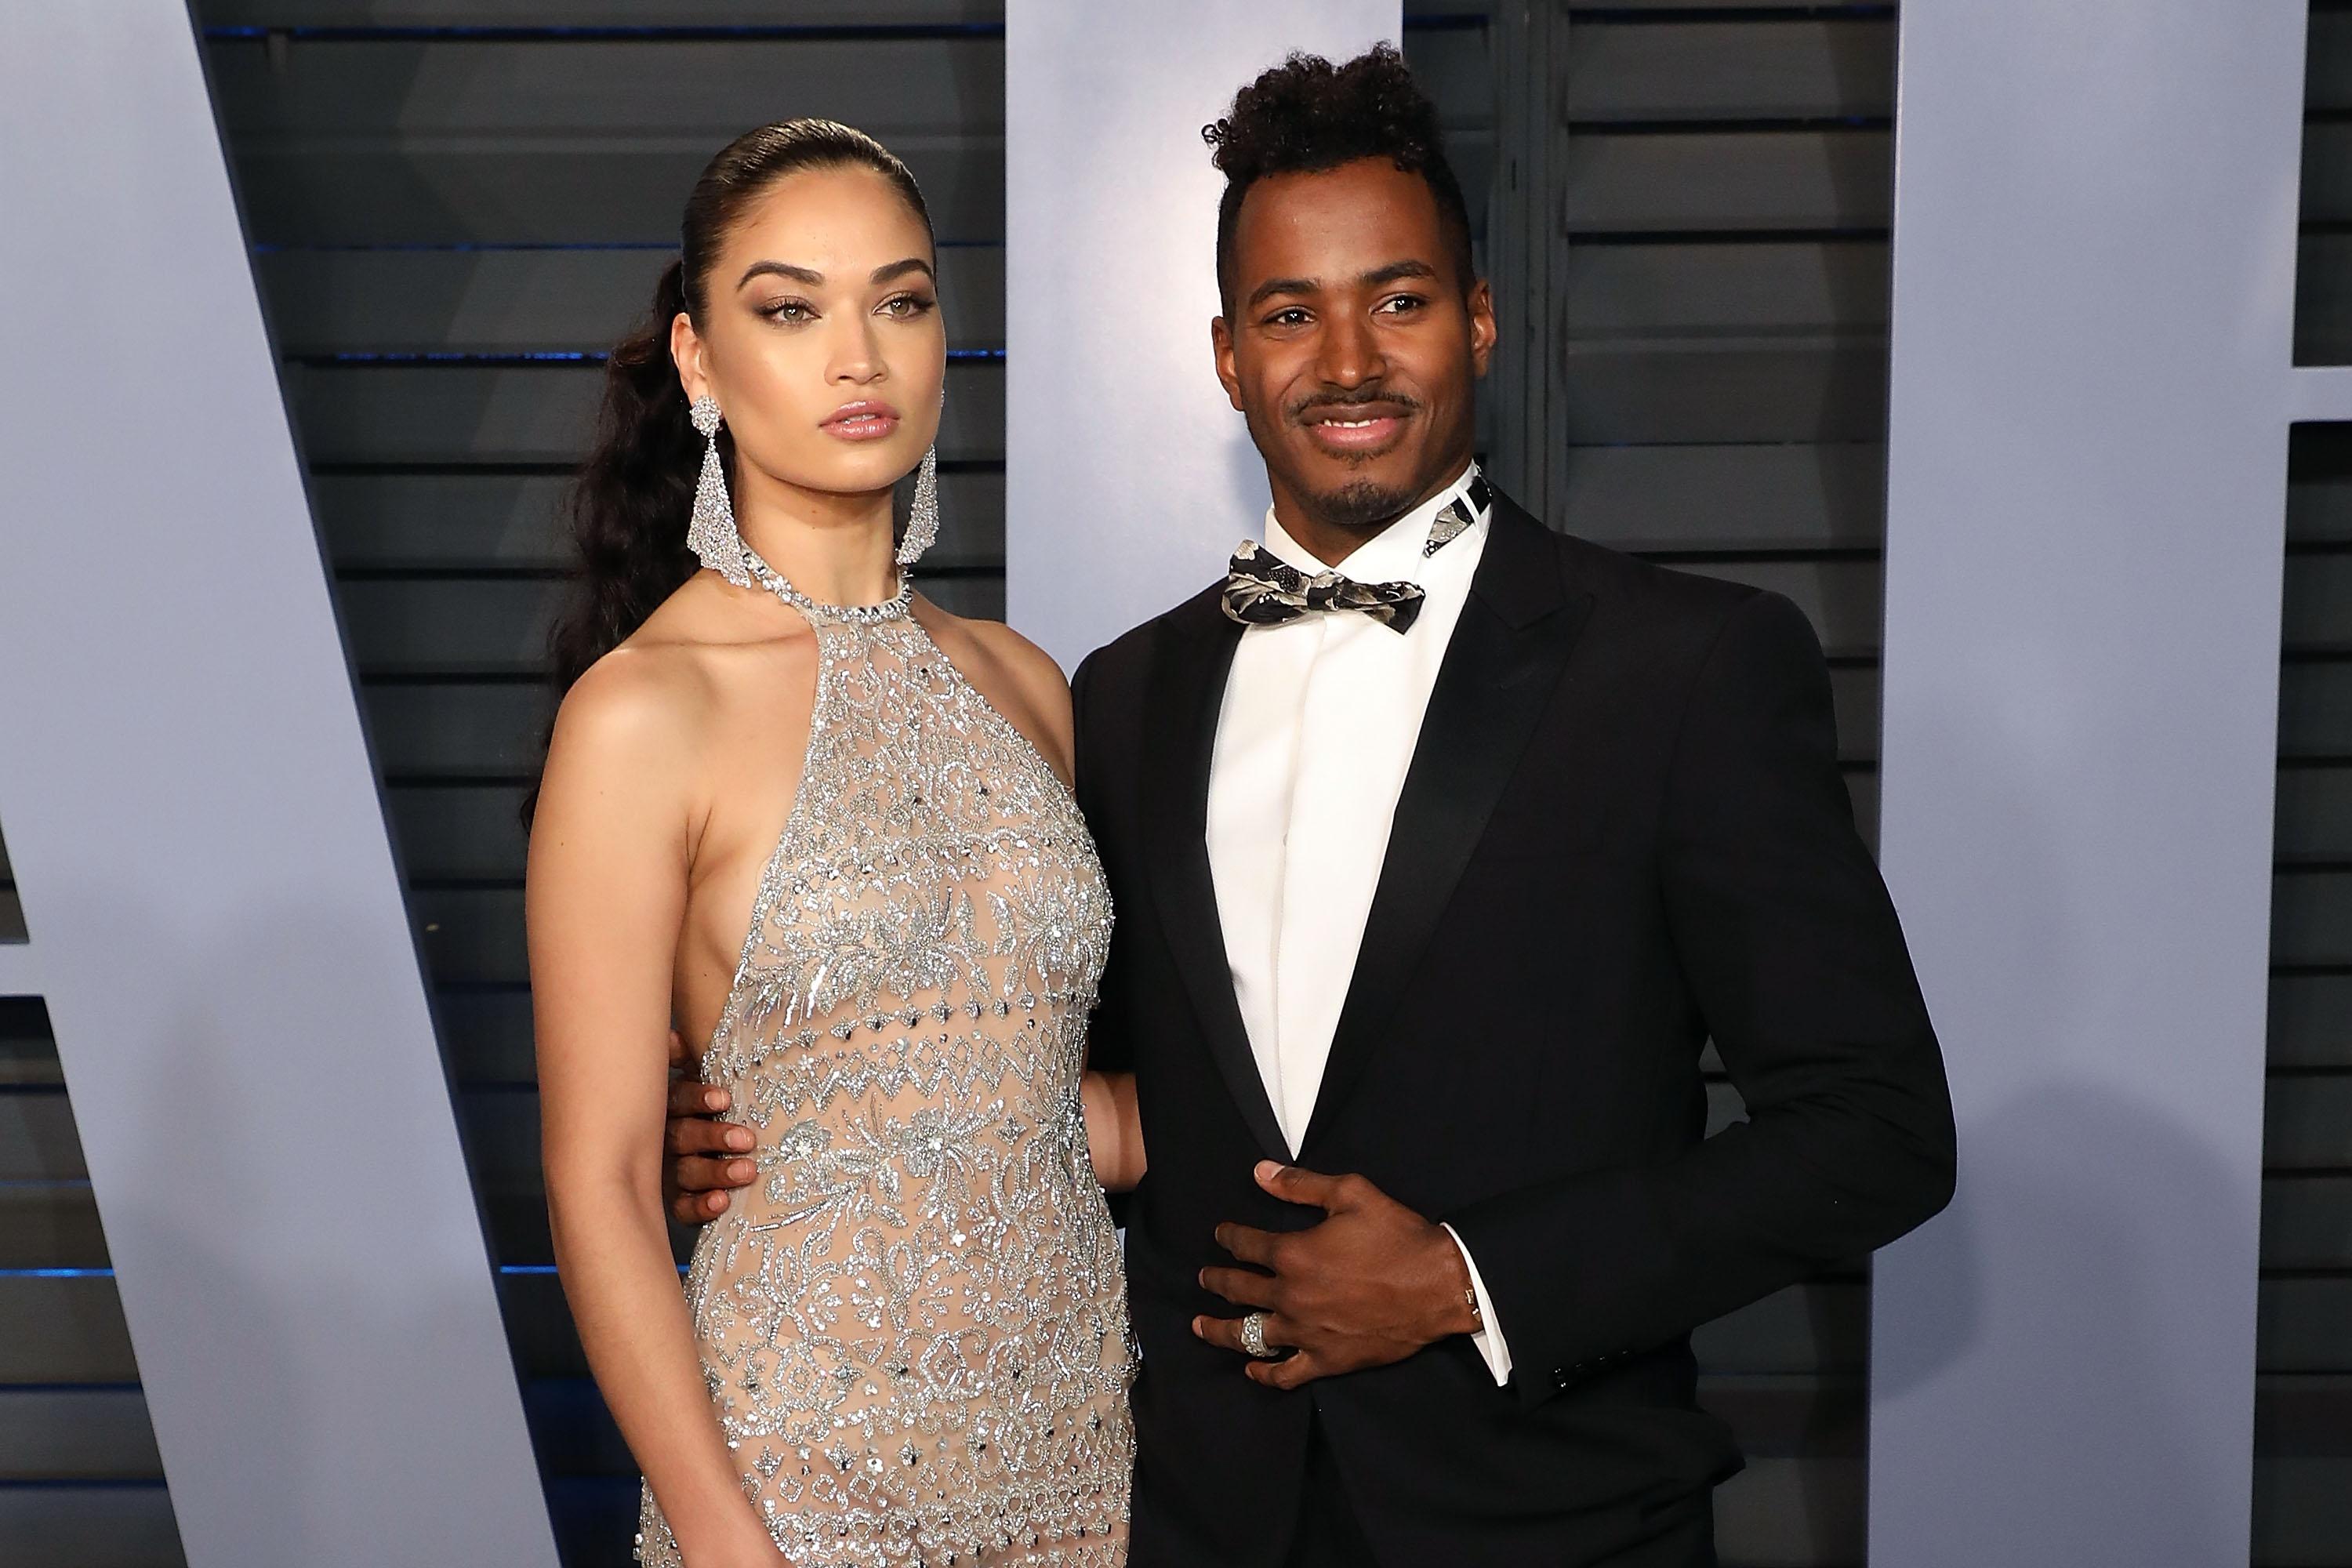 Shanina Shaik And DJ Ruckus Settle Divorce Case, After She Goes Public With New Man